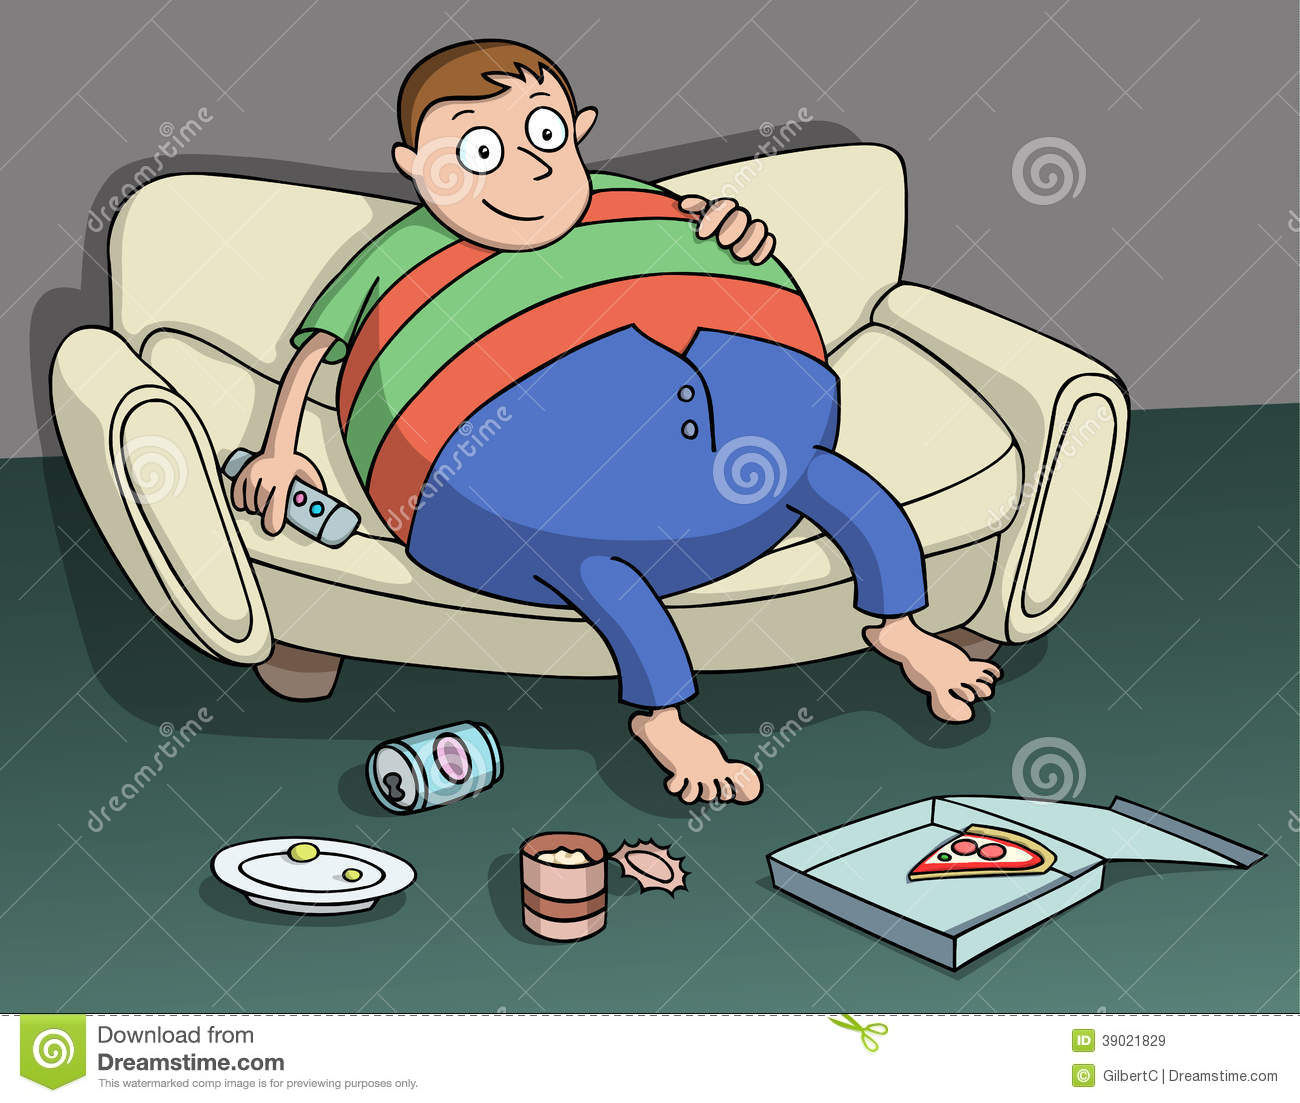 Other Food Over The Floor  Couch Potato Cartoon  Vector Illustration